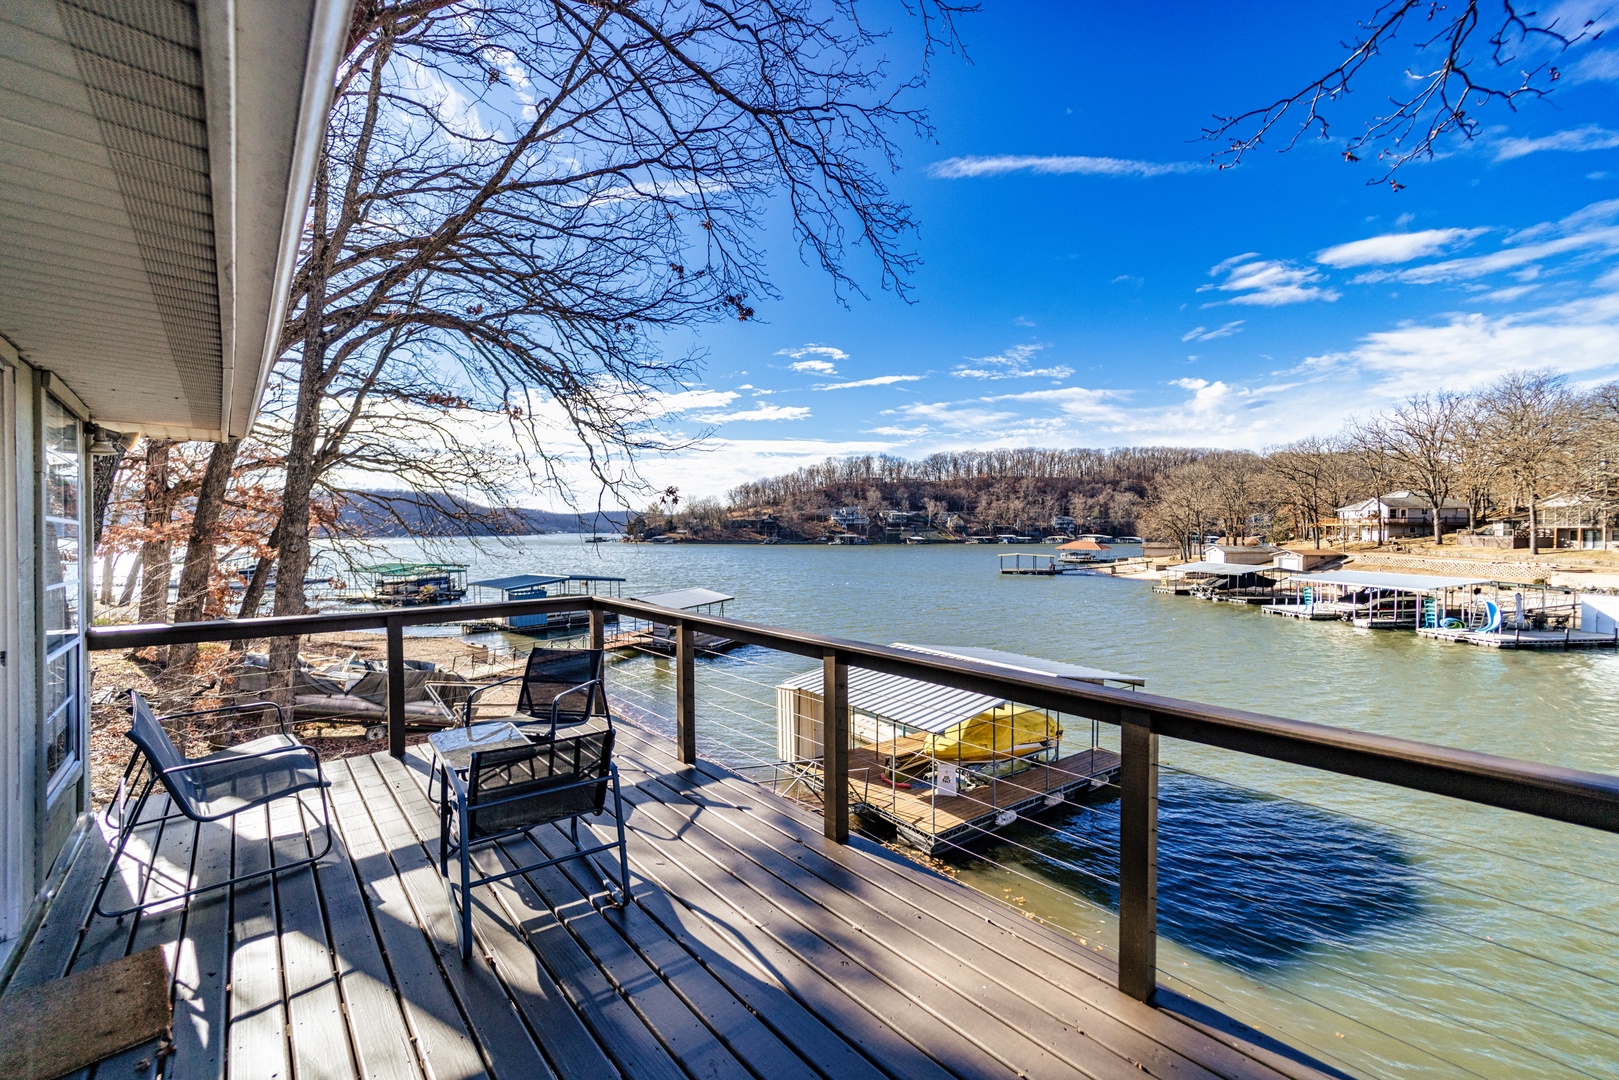 Lounge the day away with water views on the back deck